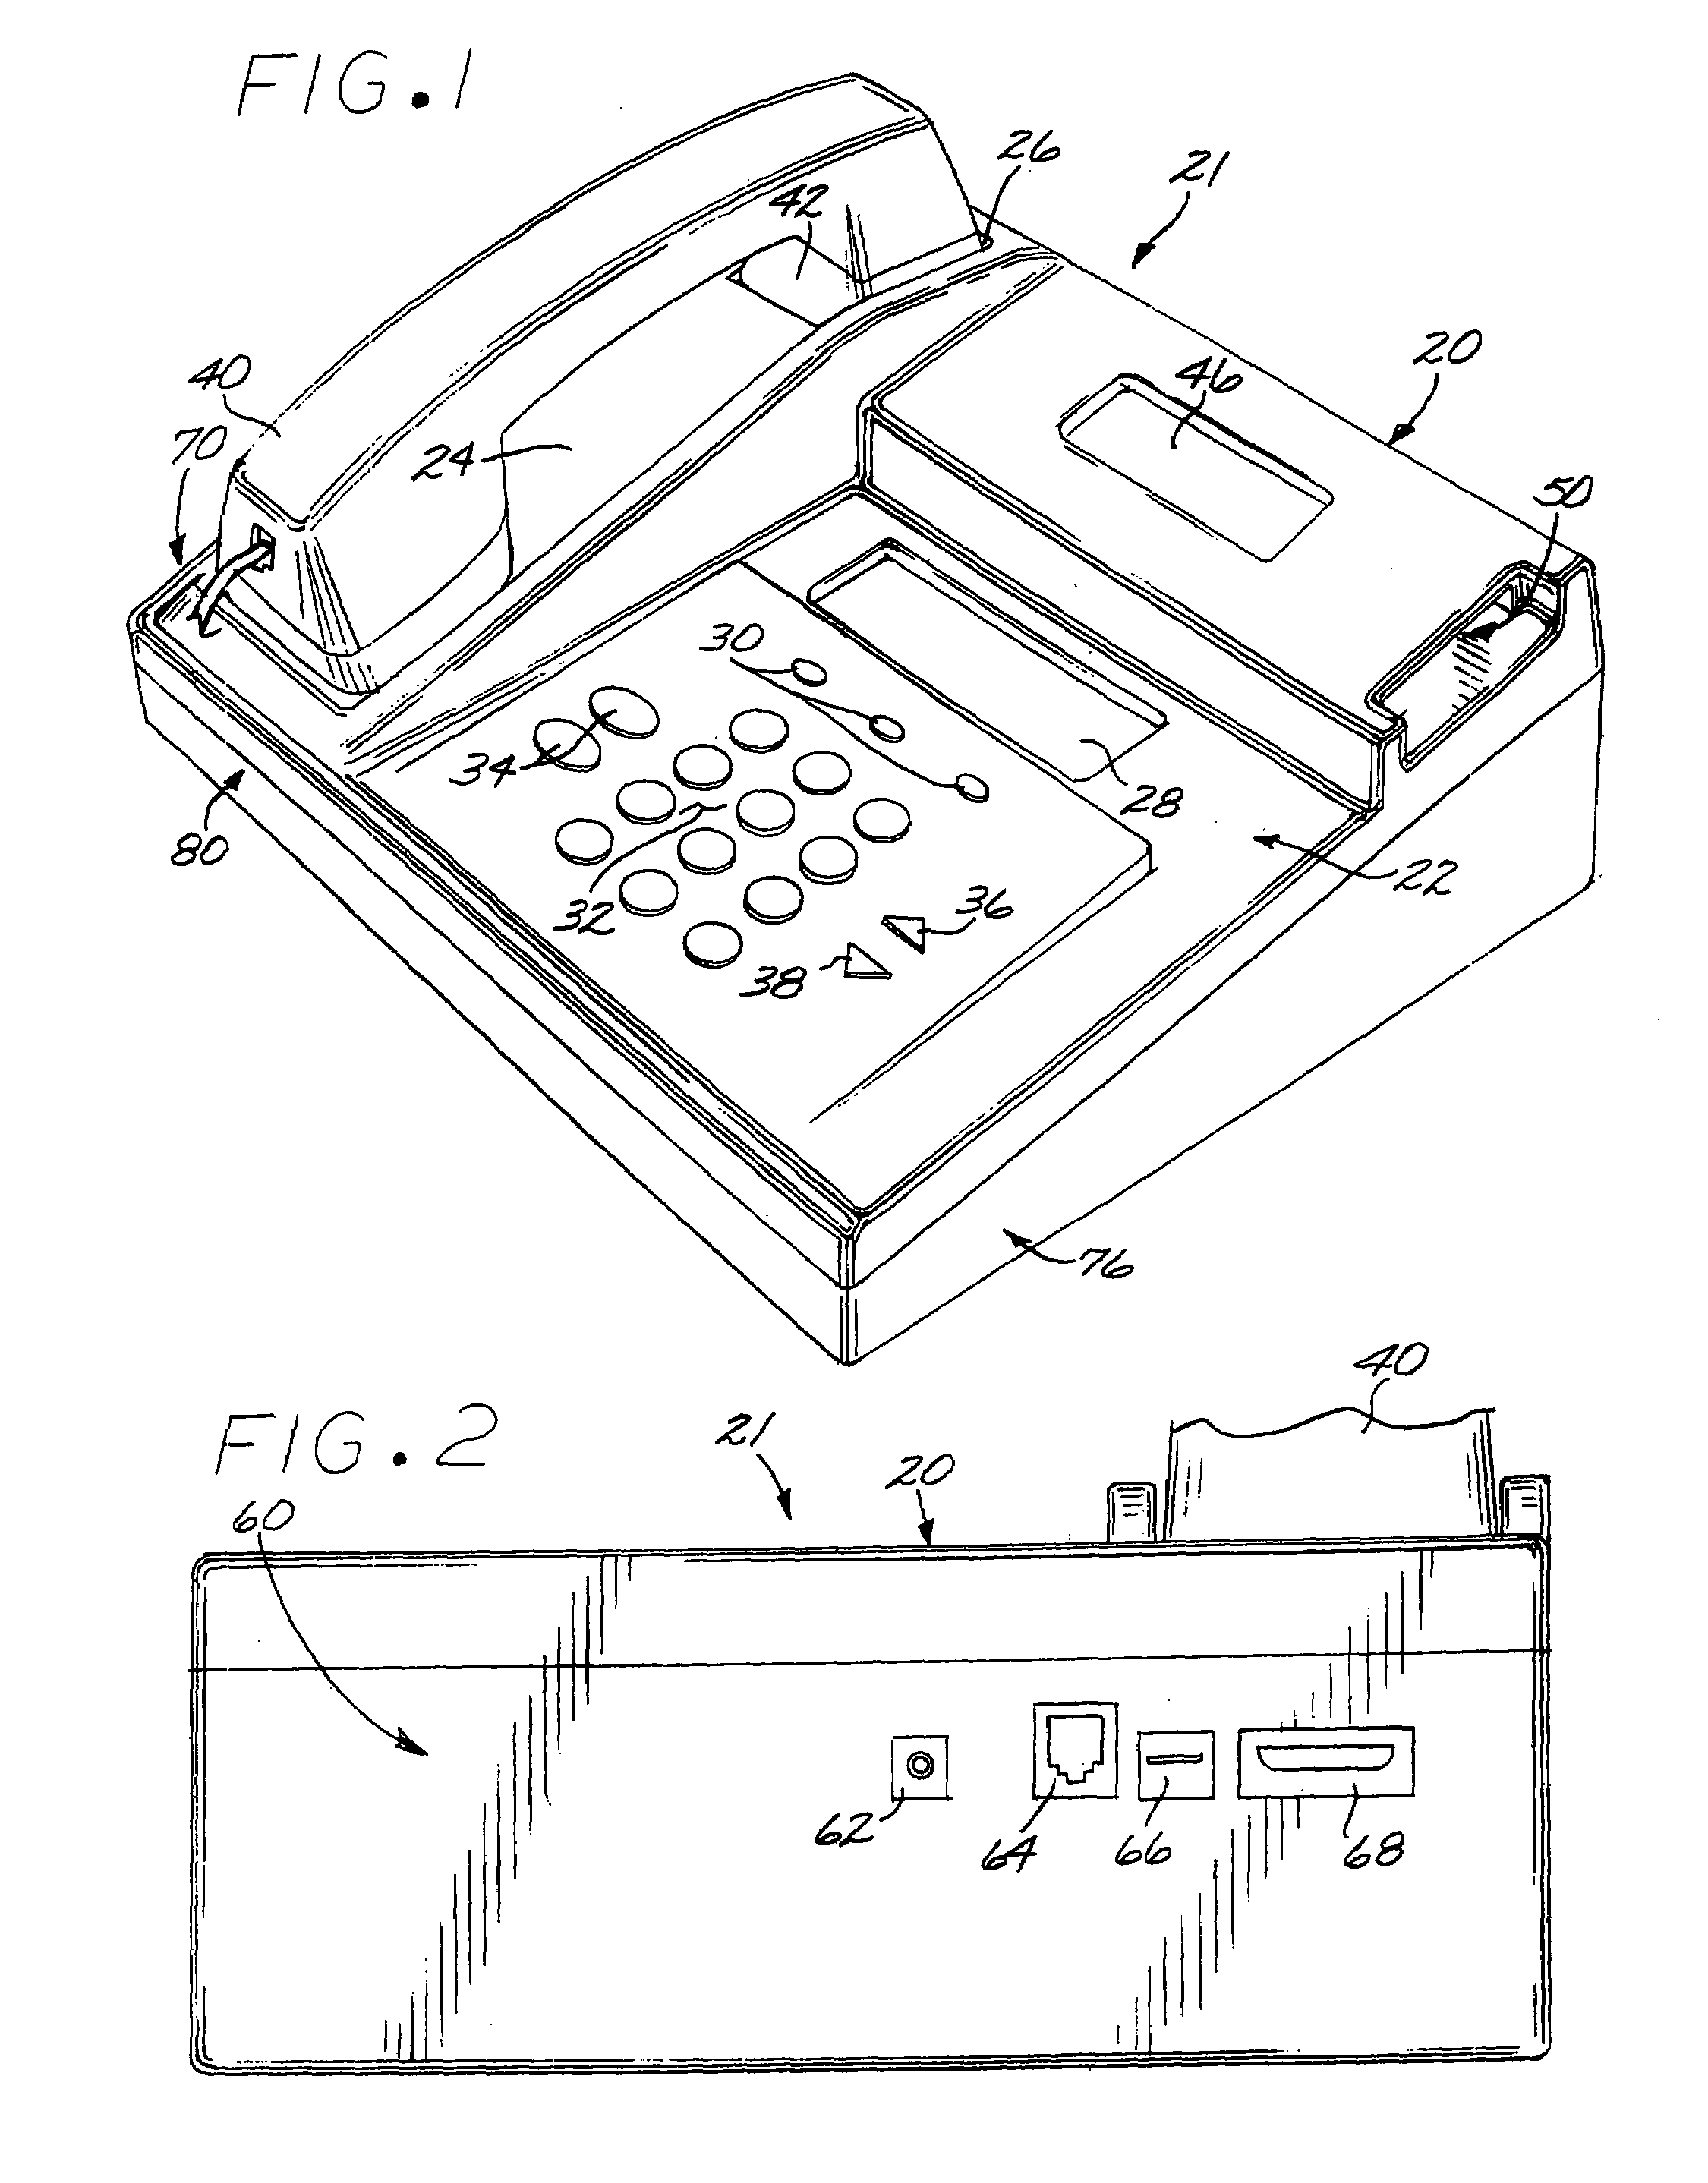 Audio recording system and method of use